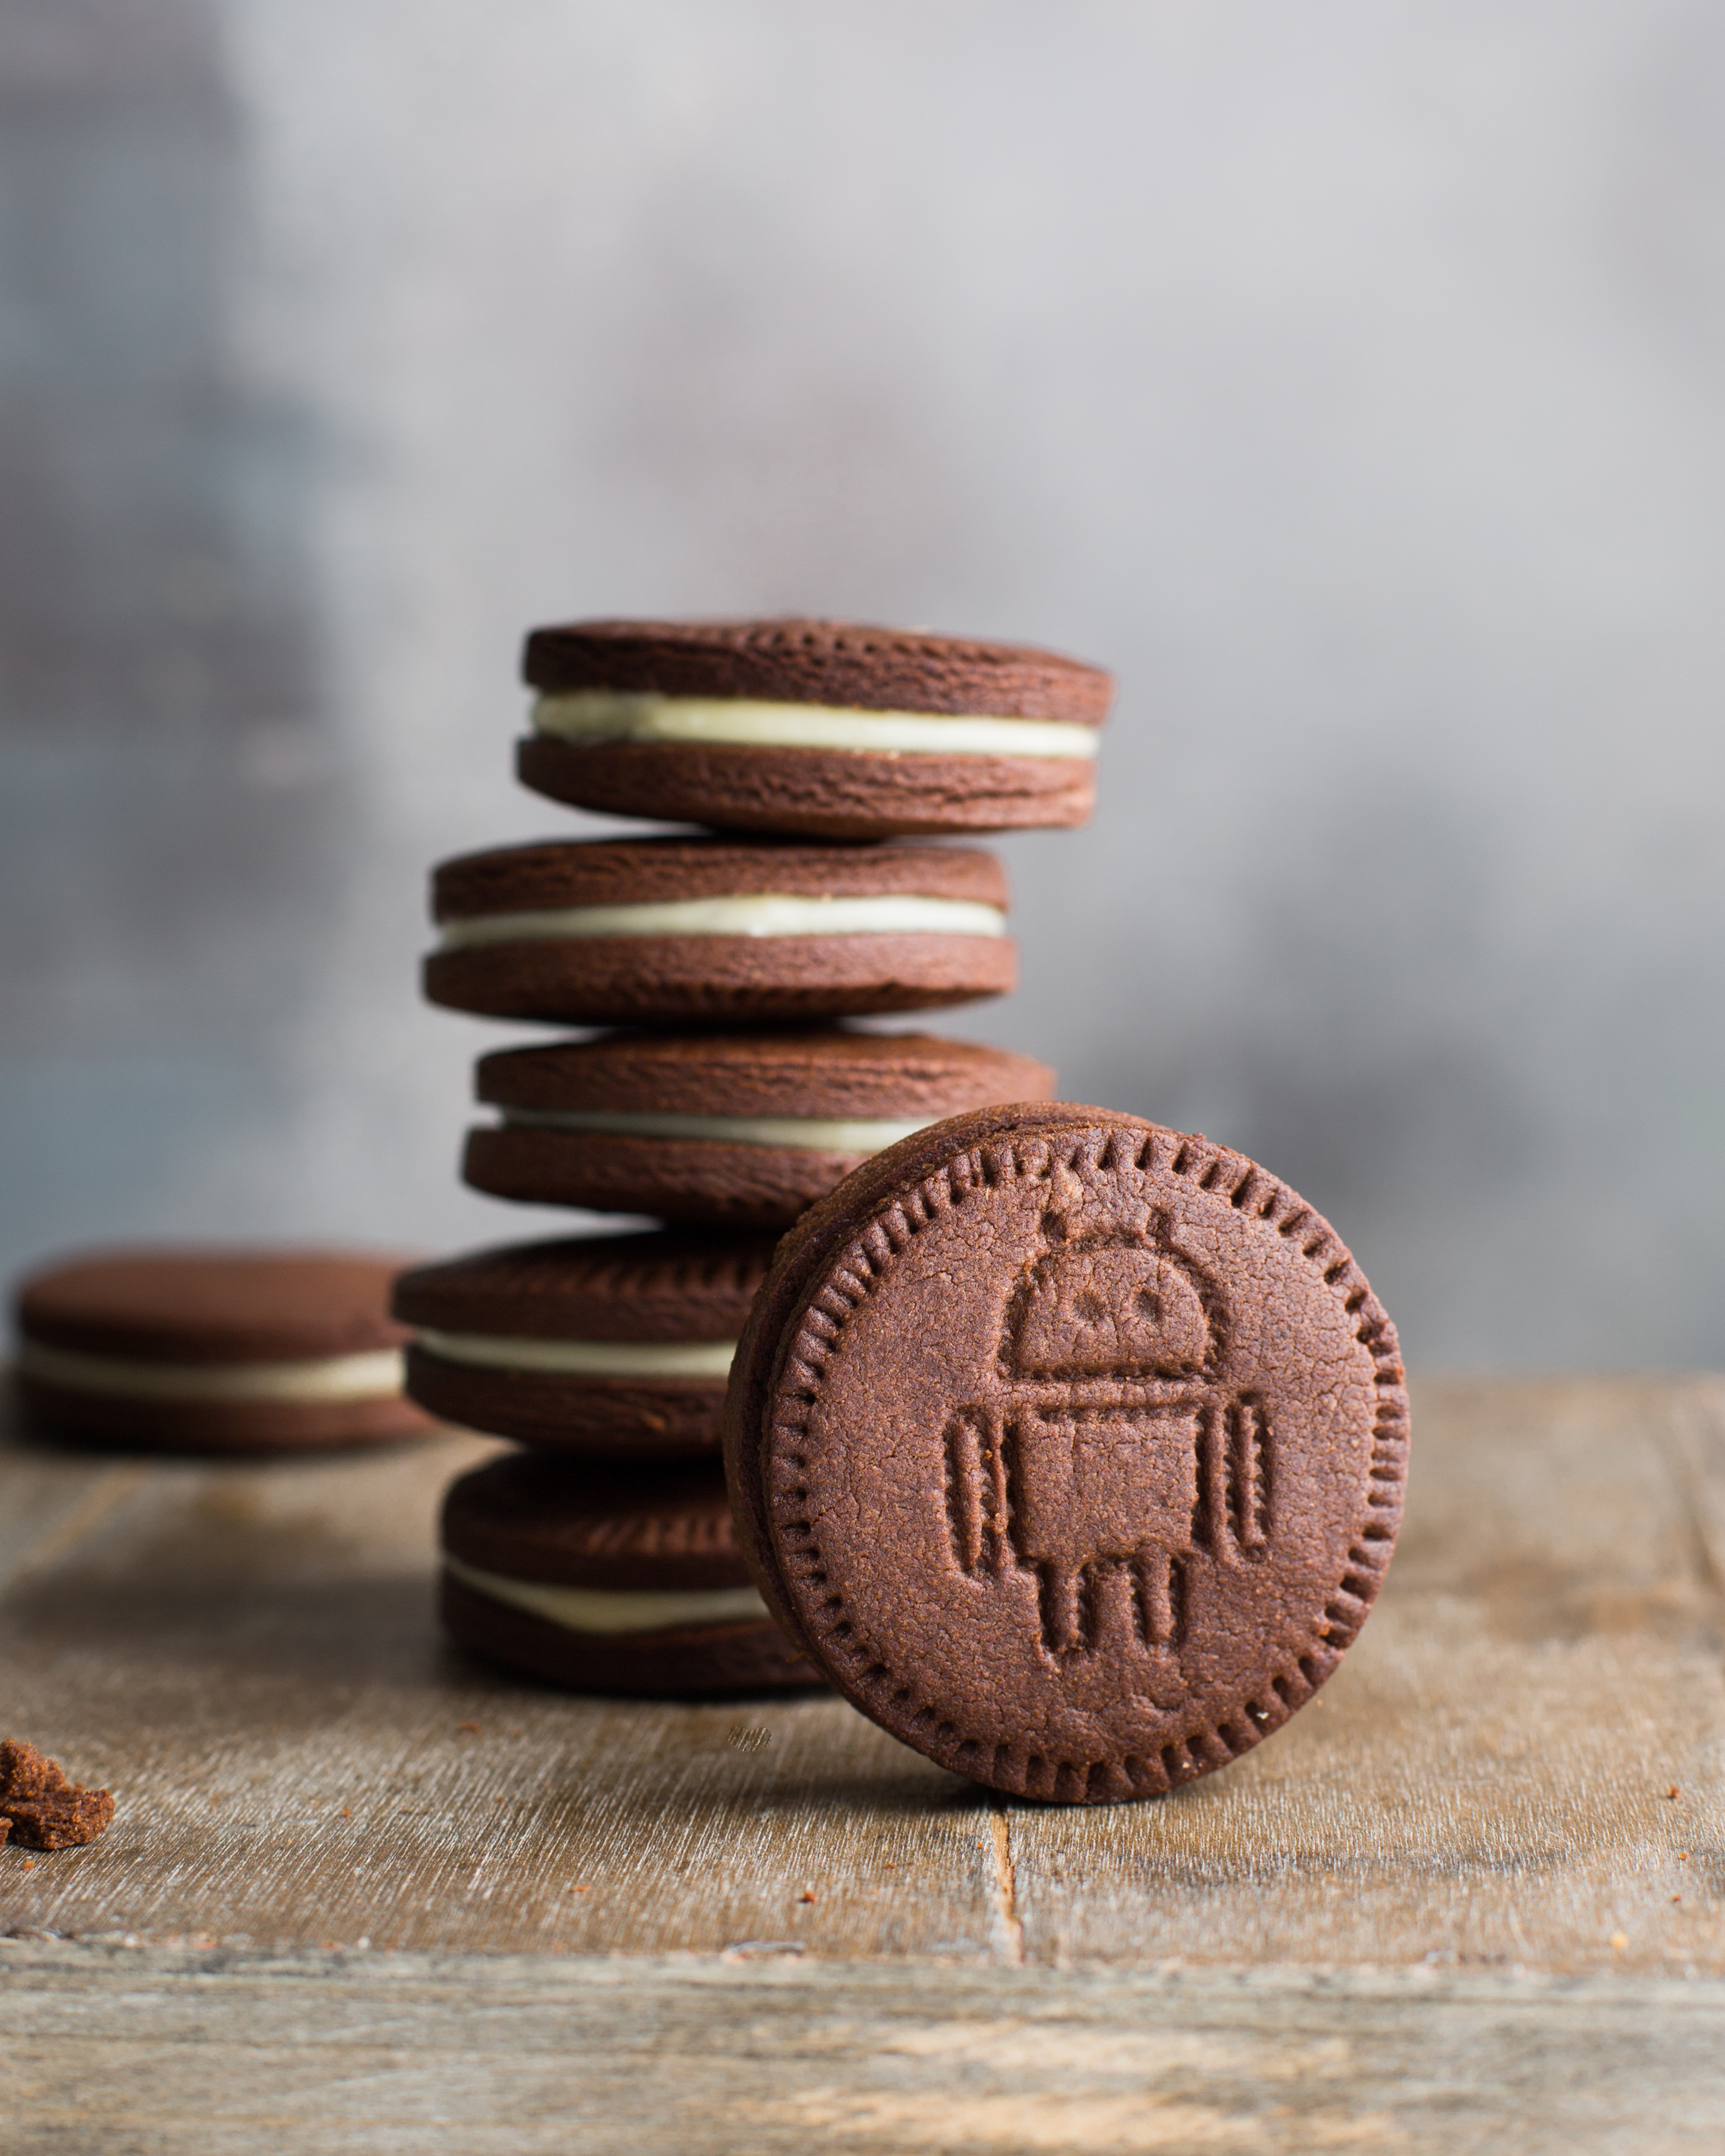 [Image of a stack of cookies, one with the android logo]